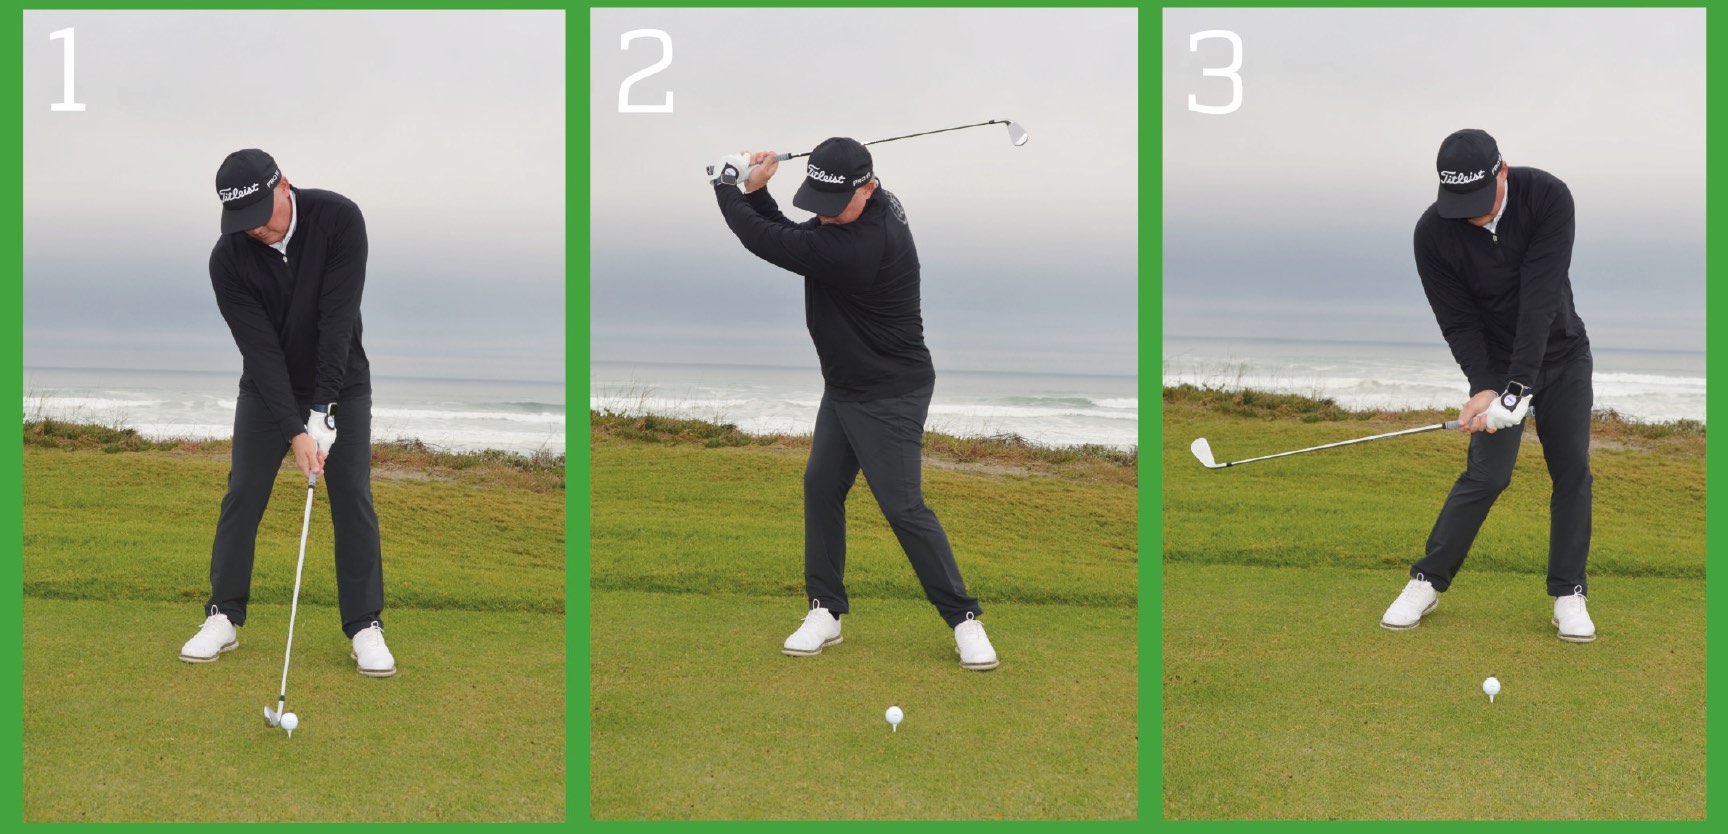 III. Enhancing Precision in the Downswing